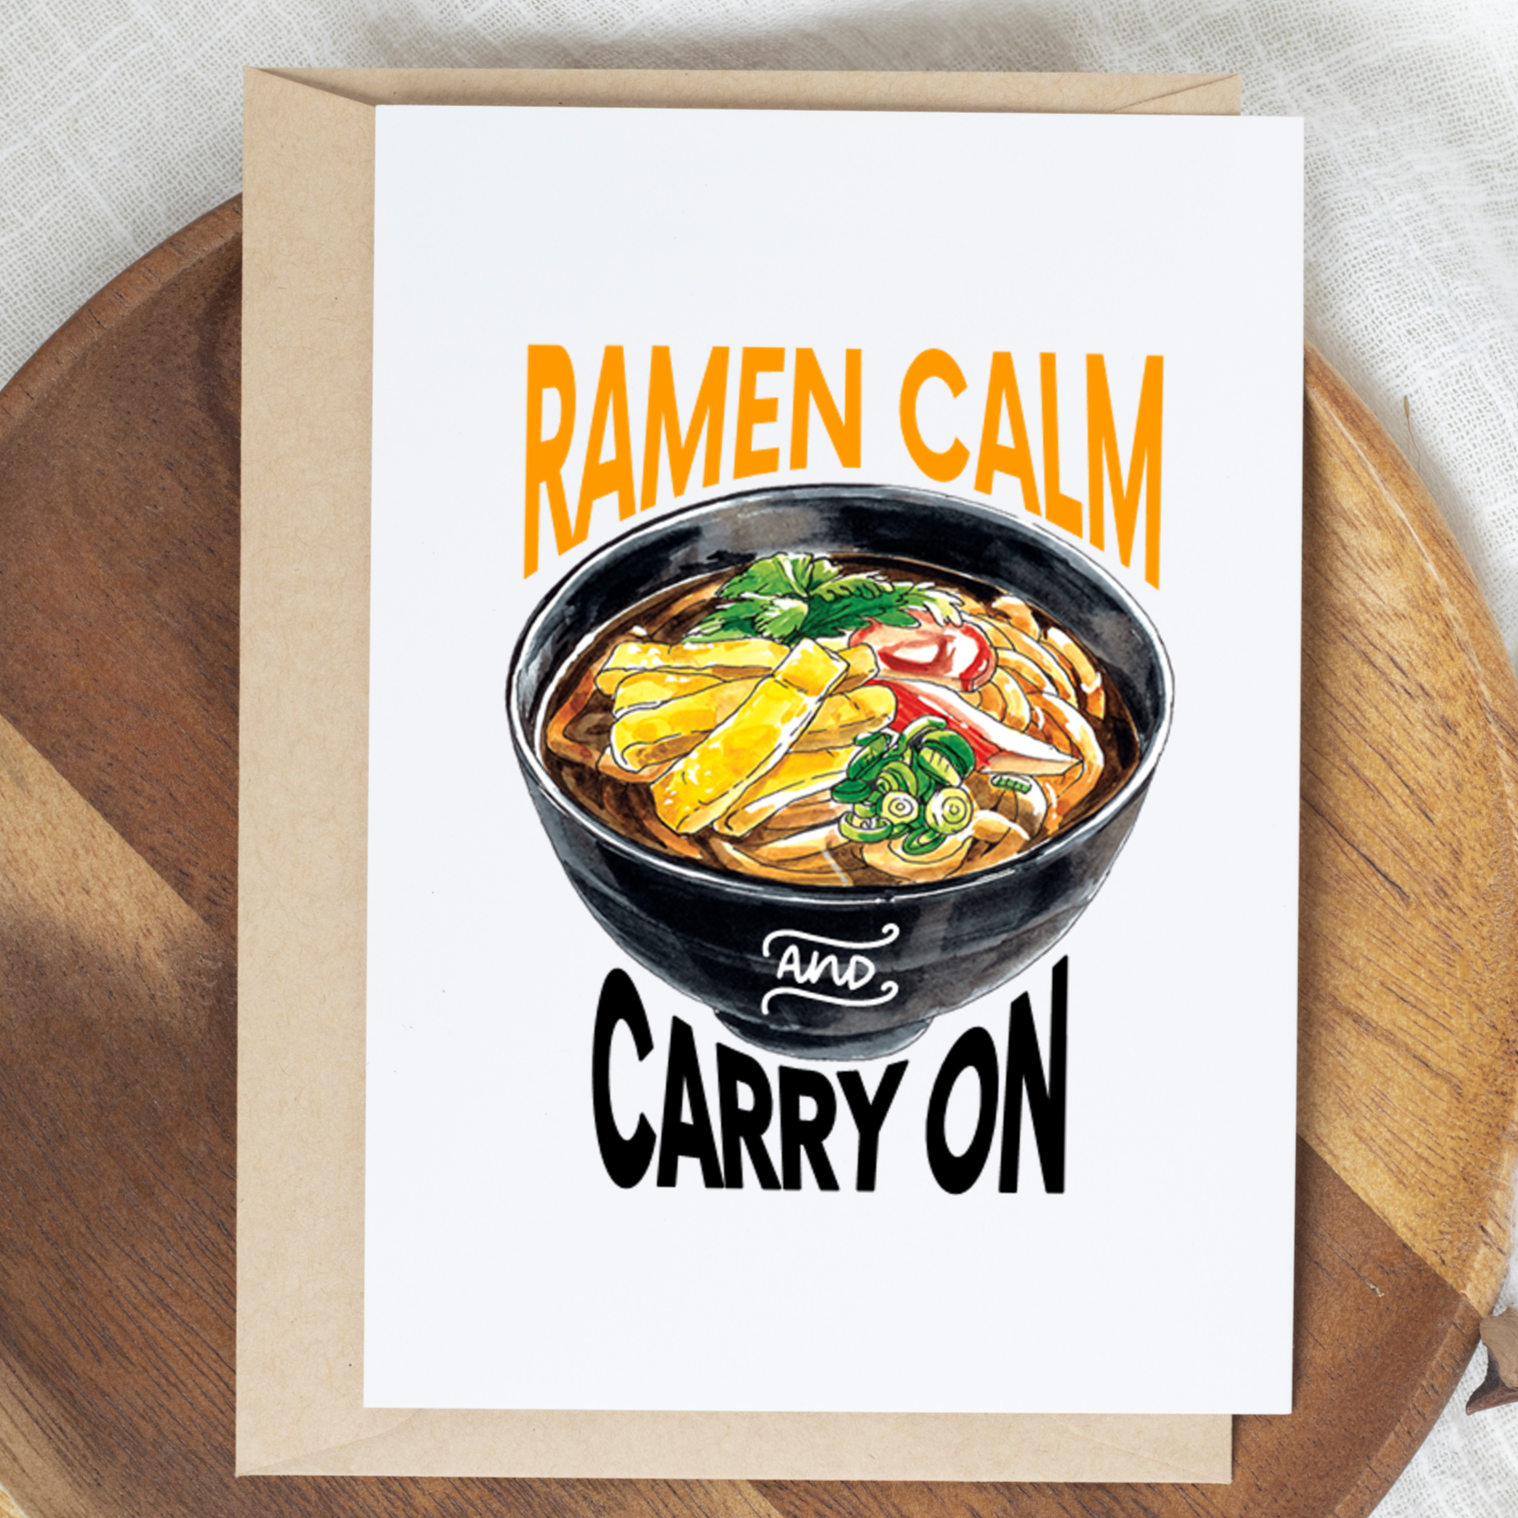 Ramen Calm and Carry On blank greeting card